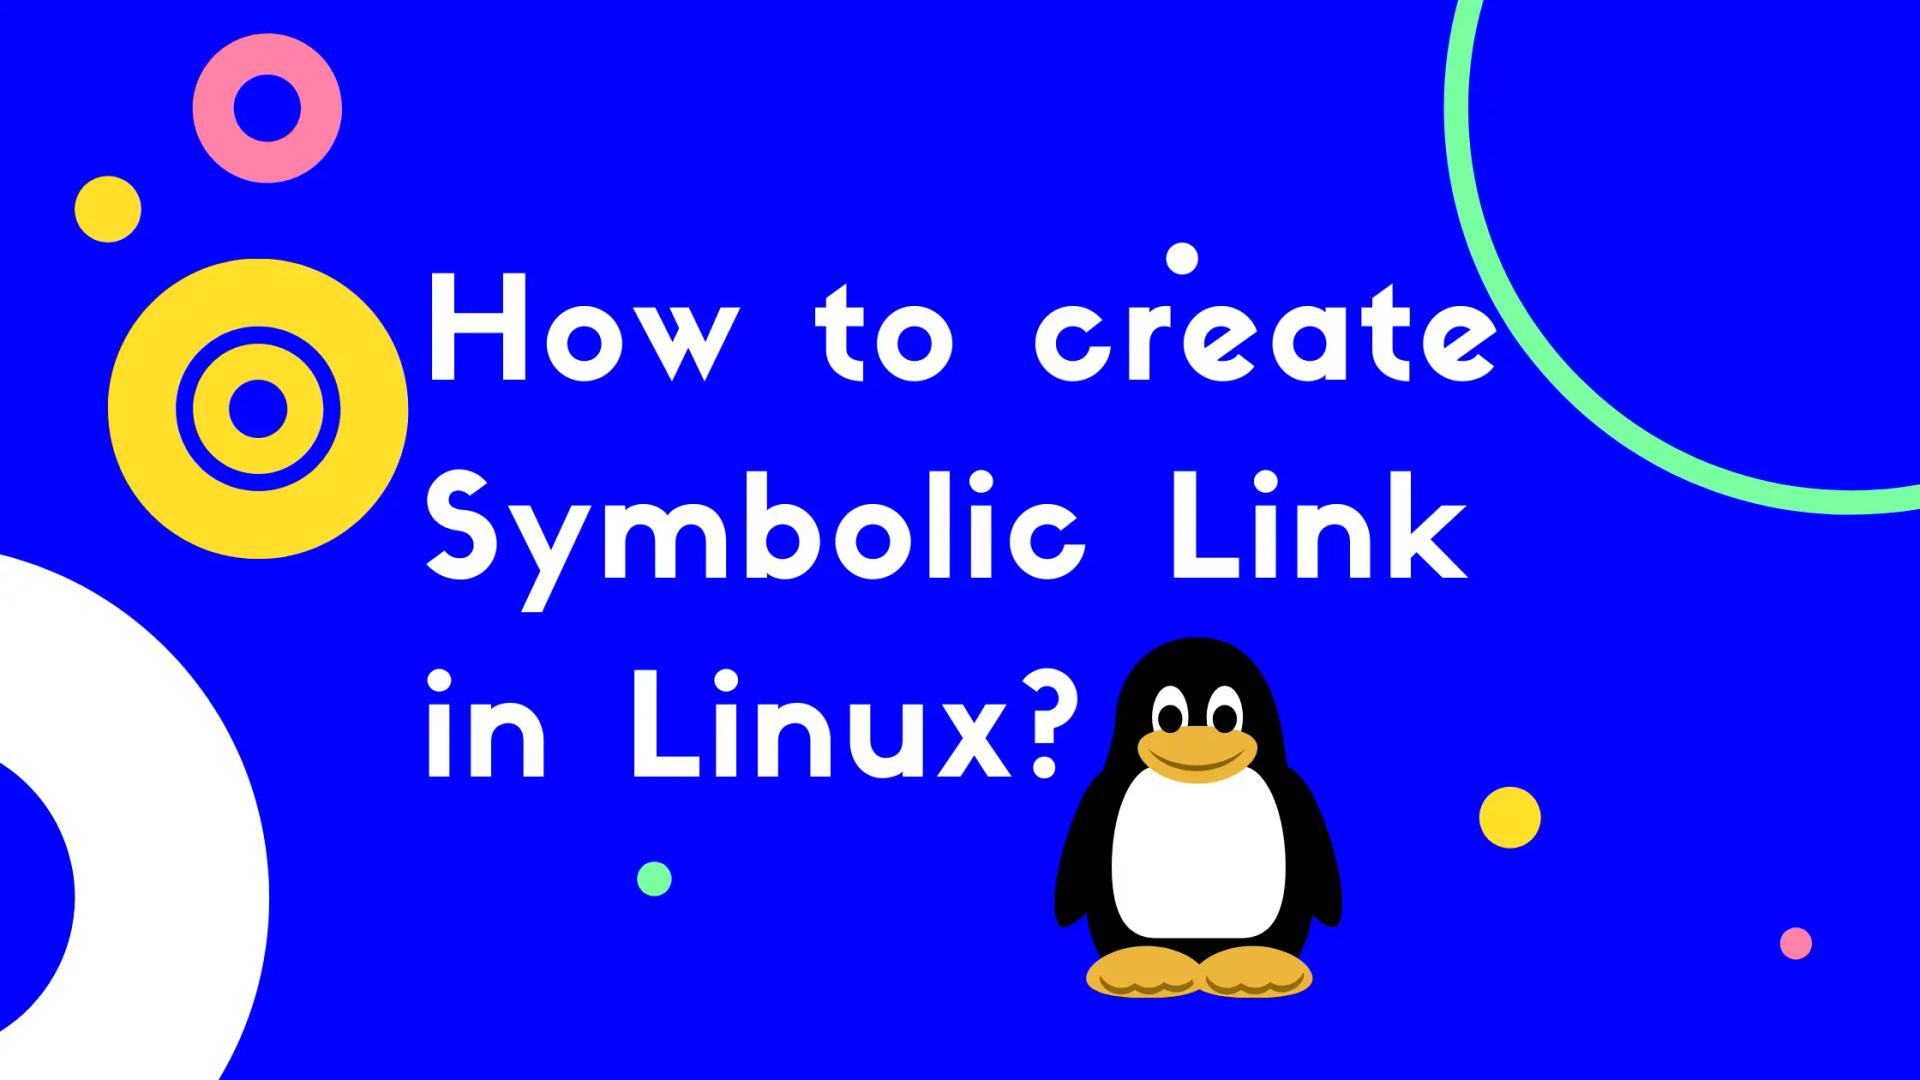 How to create a Symbolic link in Linux?